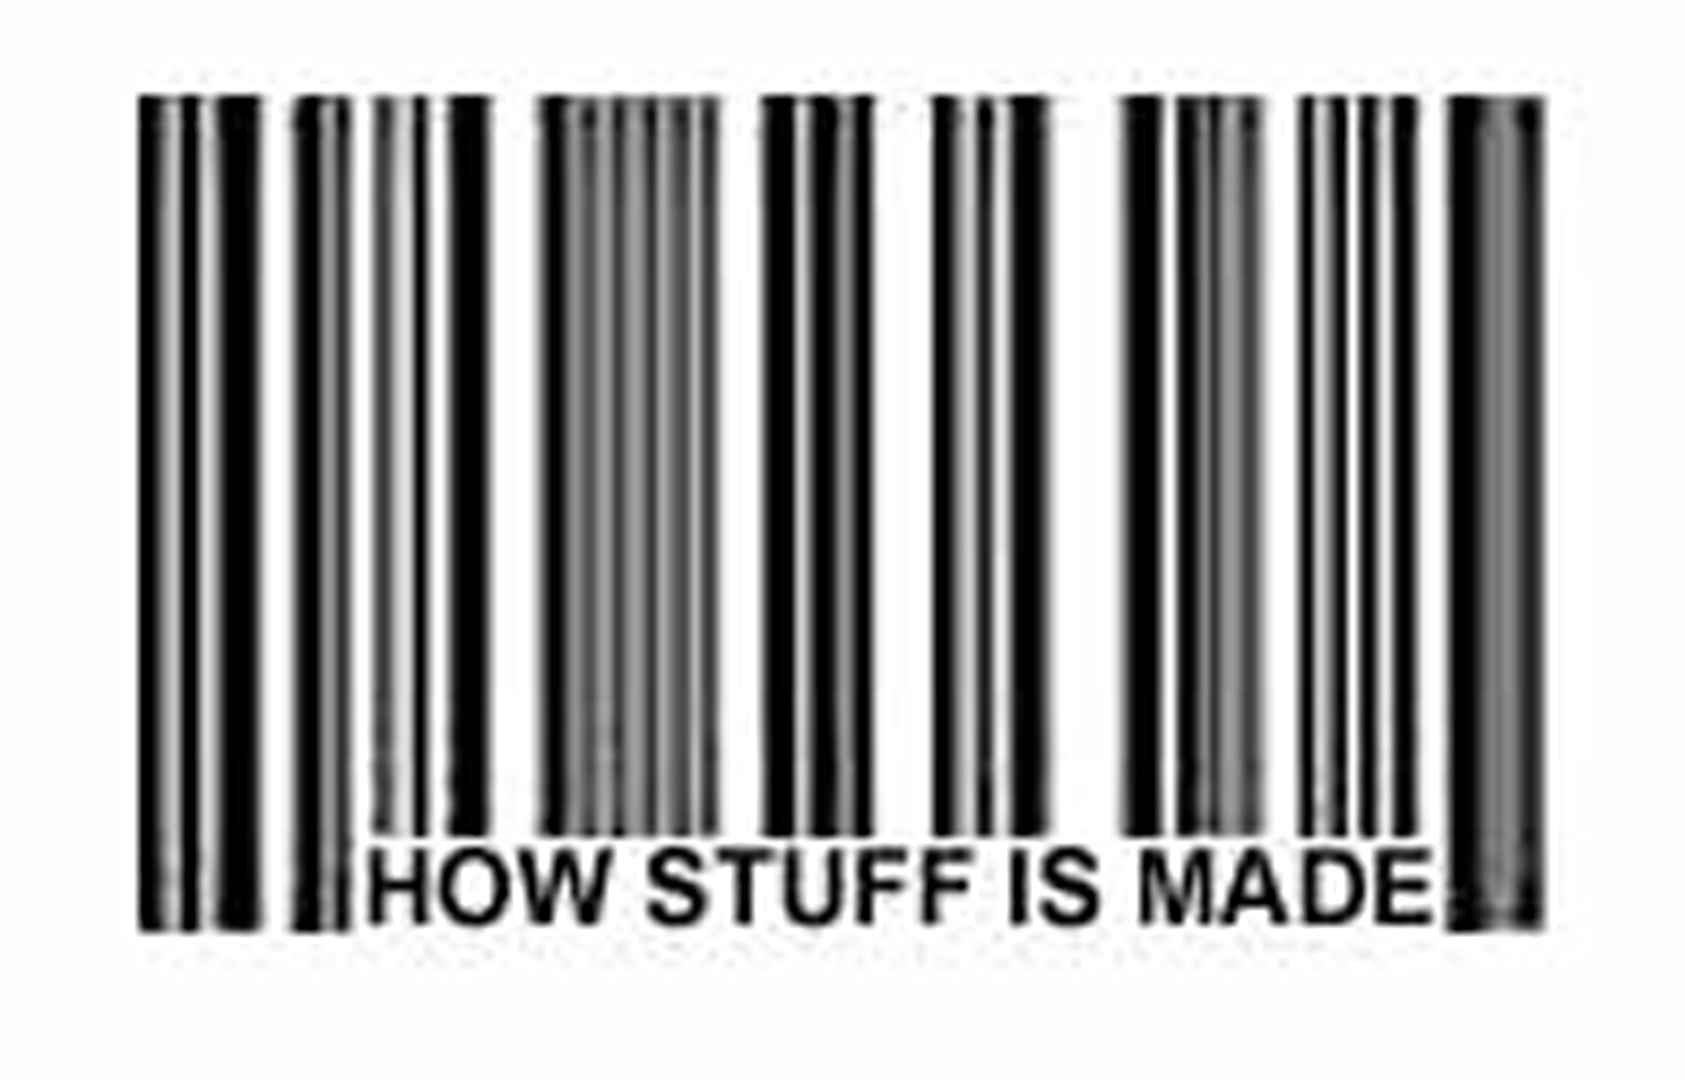 ©2005-ongoing, Natalie Jeremijenko, Chris Dierks, Jesse Arnold, and Robert Twomey, How Stuff Is Made IB